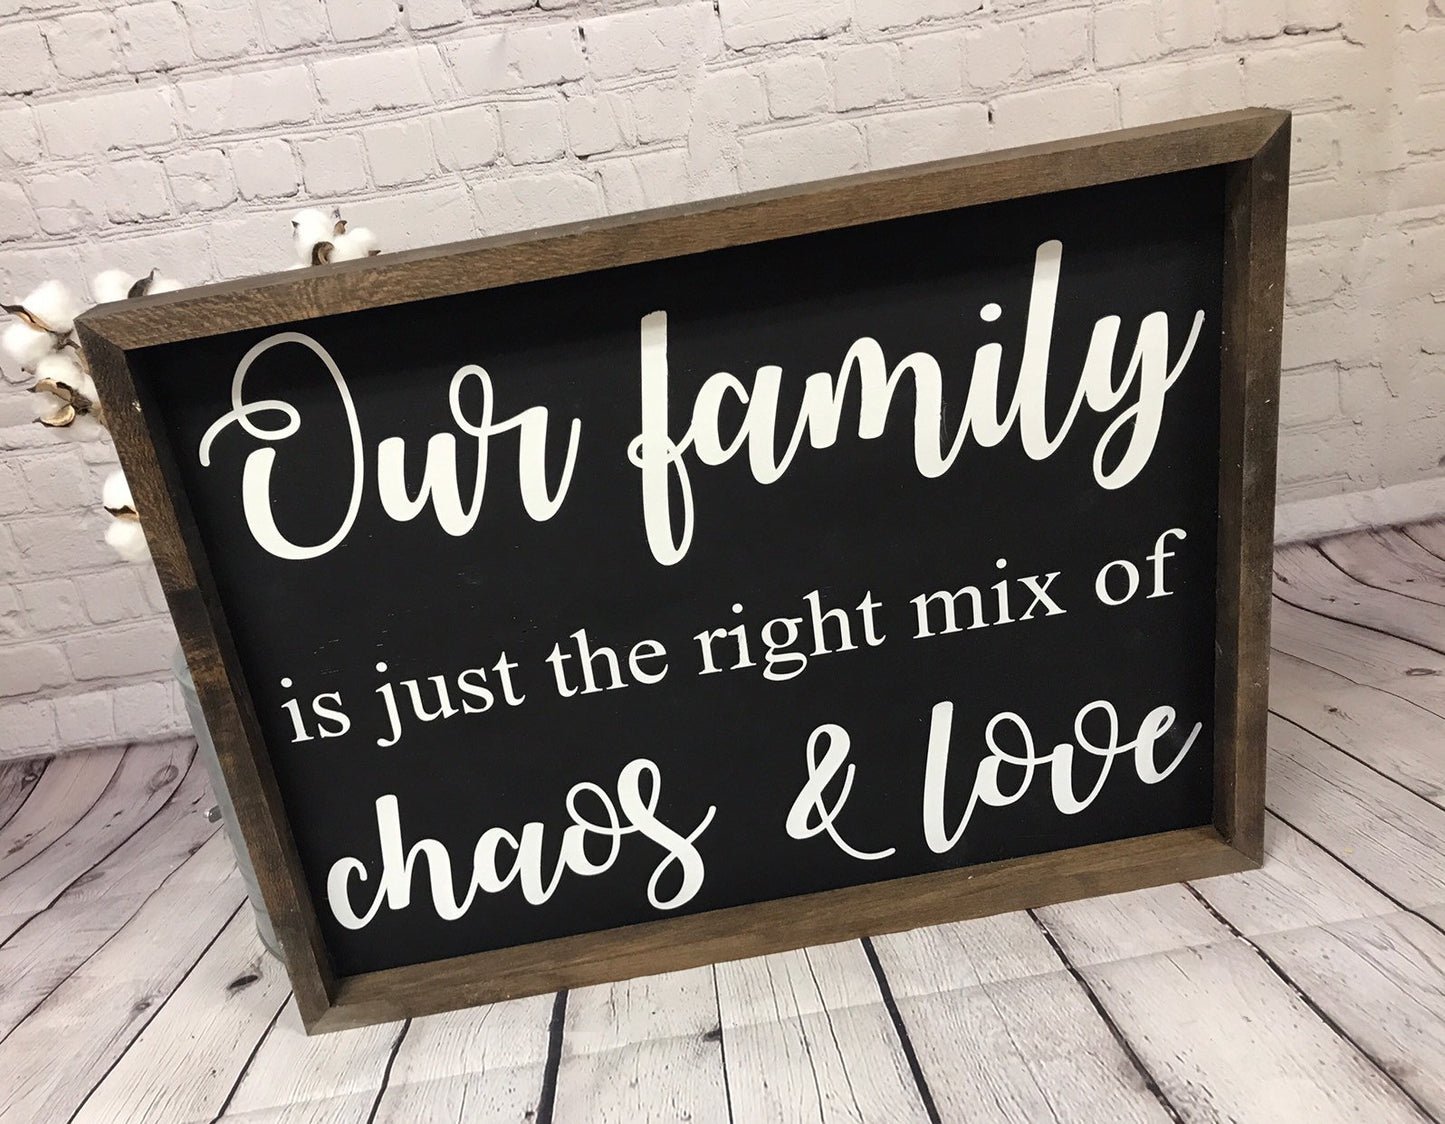 Our Family Is Just The Right Mix Of Choas & Love Farmhouse Sign | Living Room Room Decor | Family Sign